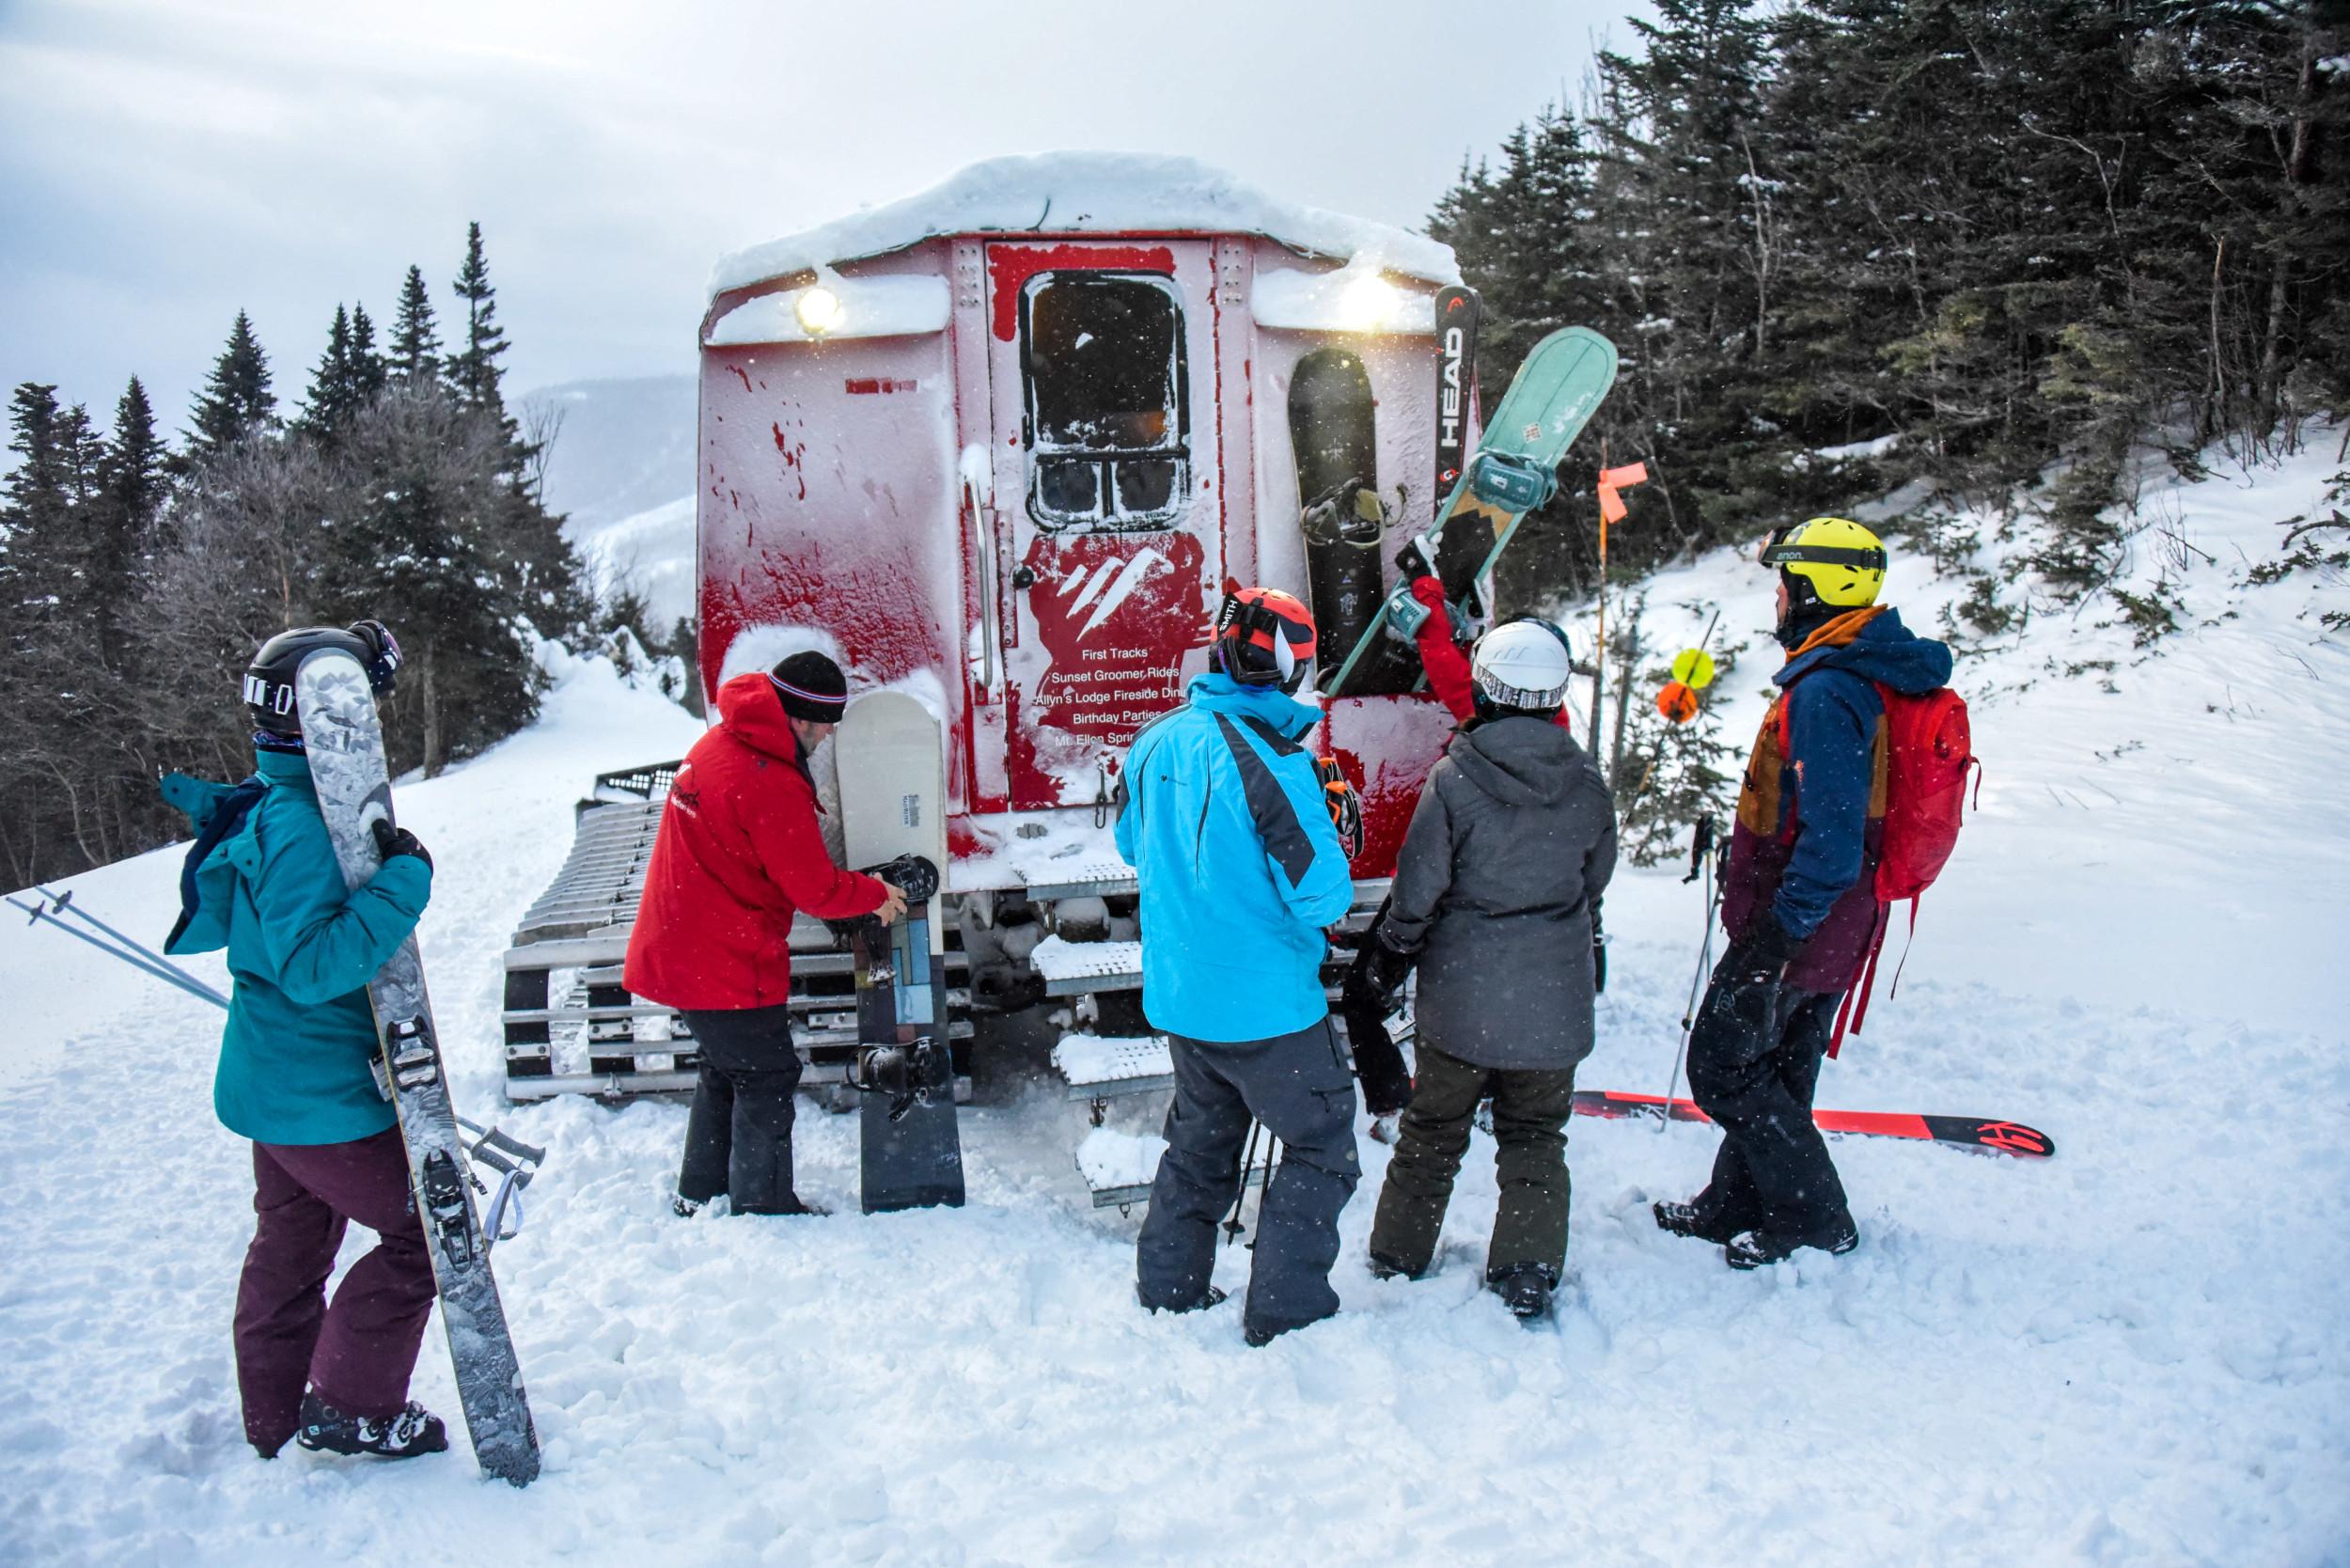 People in winter gear carrying skis and snowboards next to a snowcat